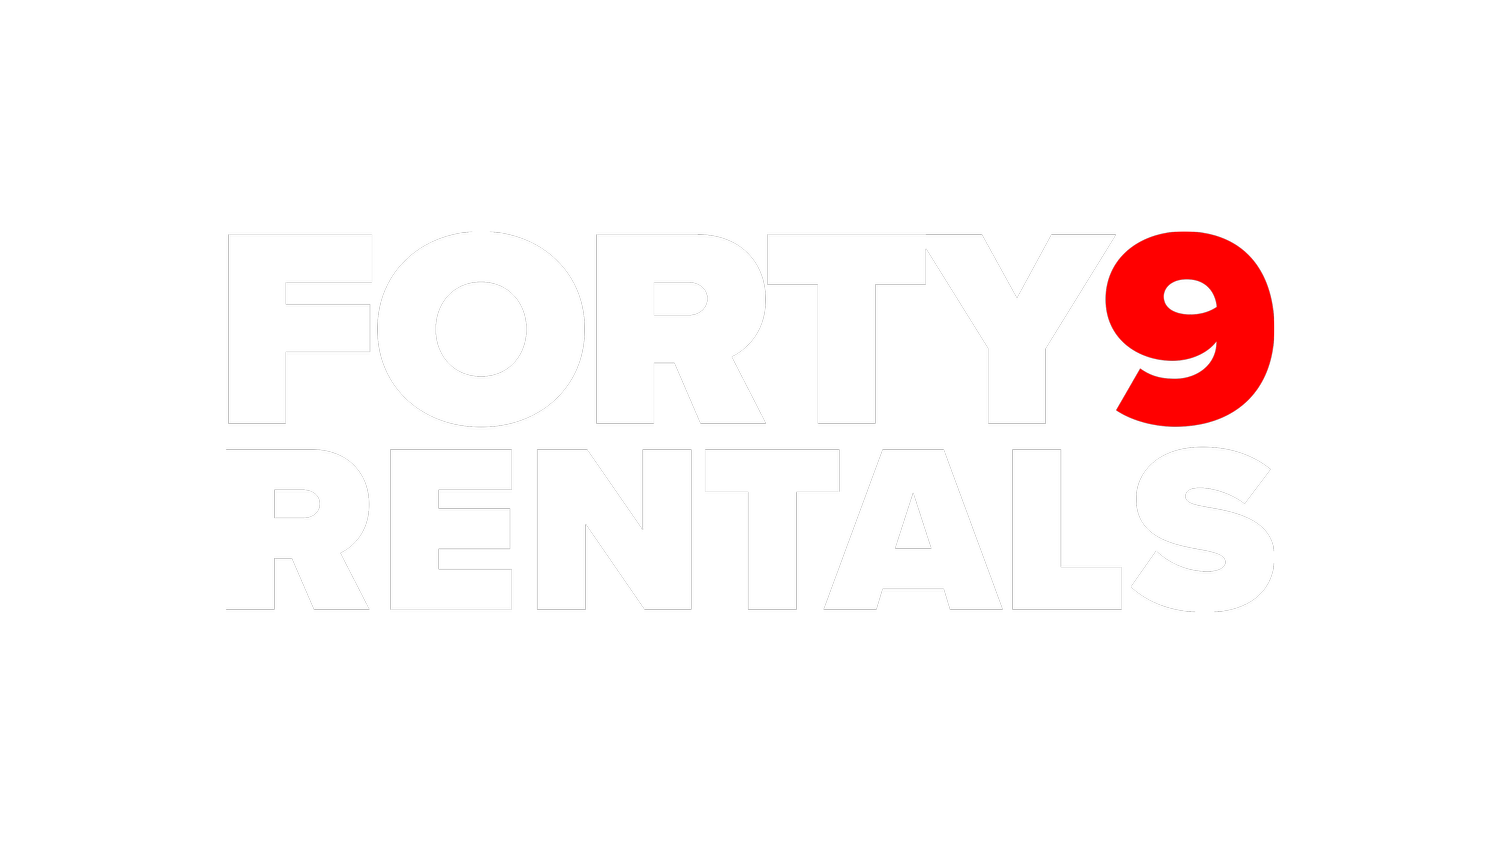 Forty9 Rentals